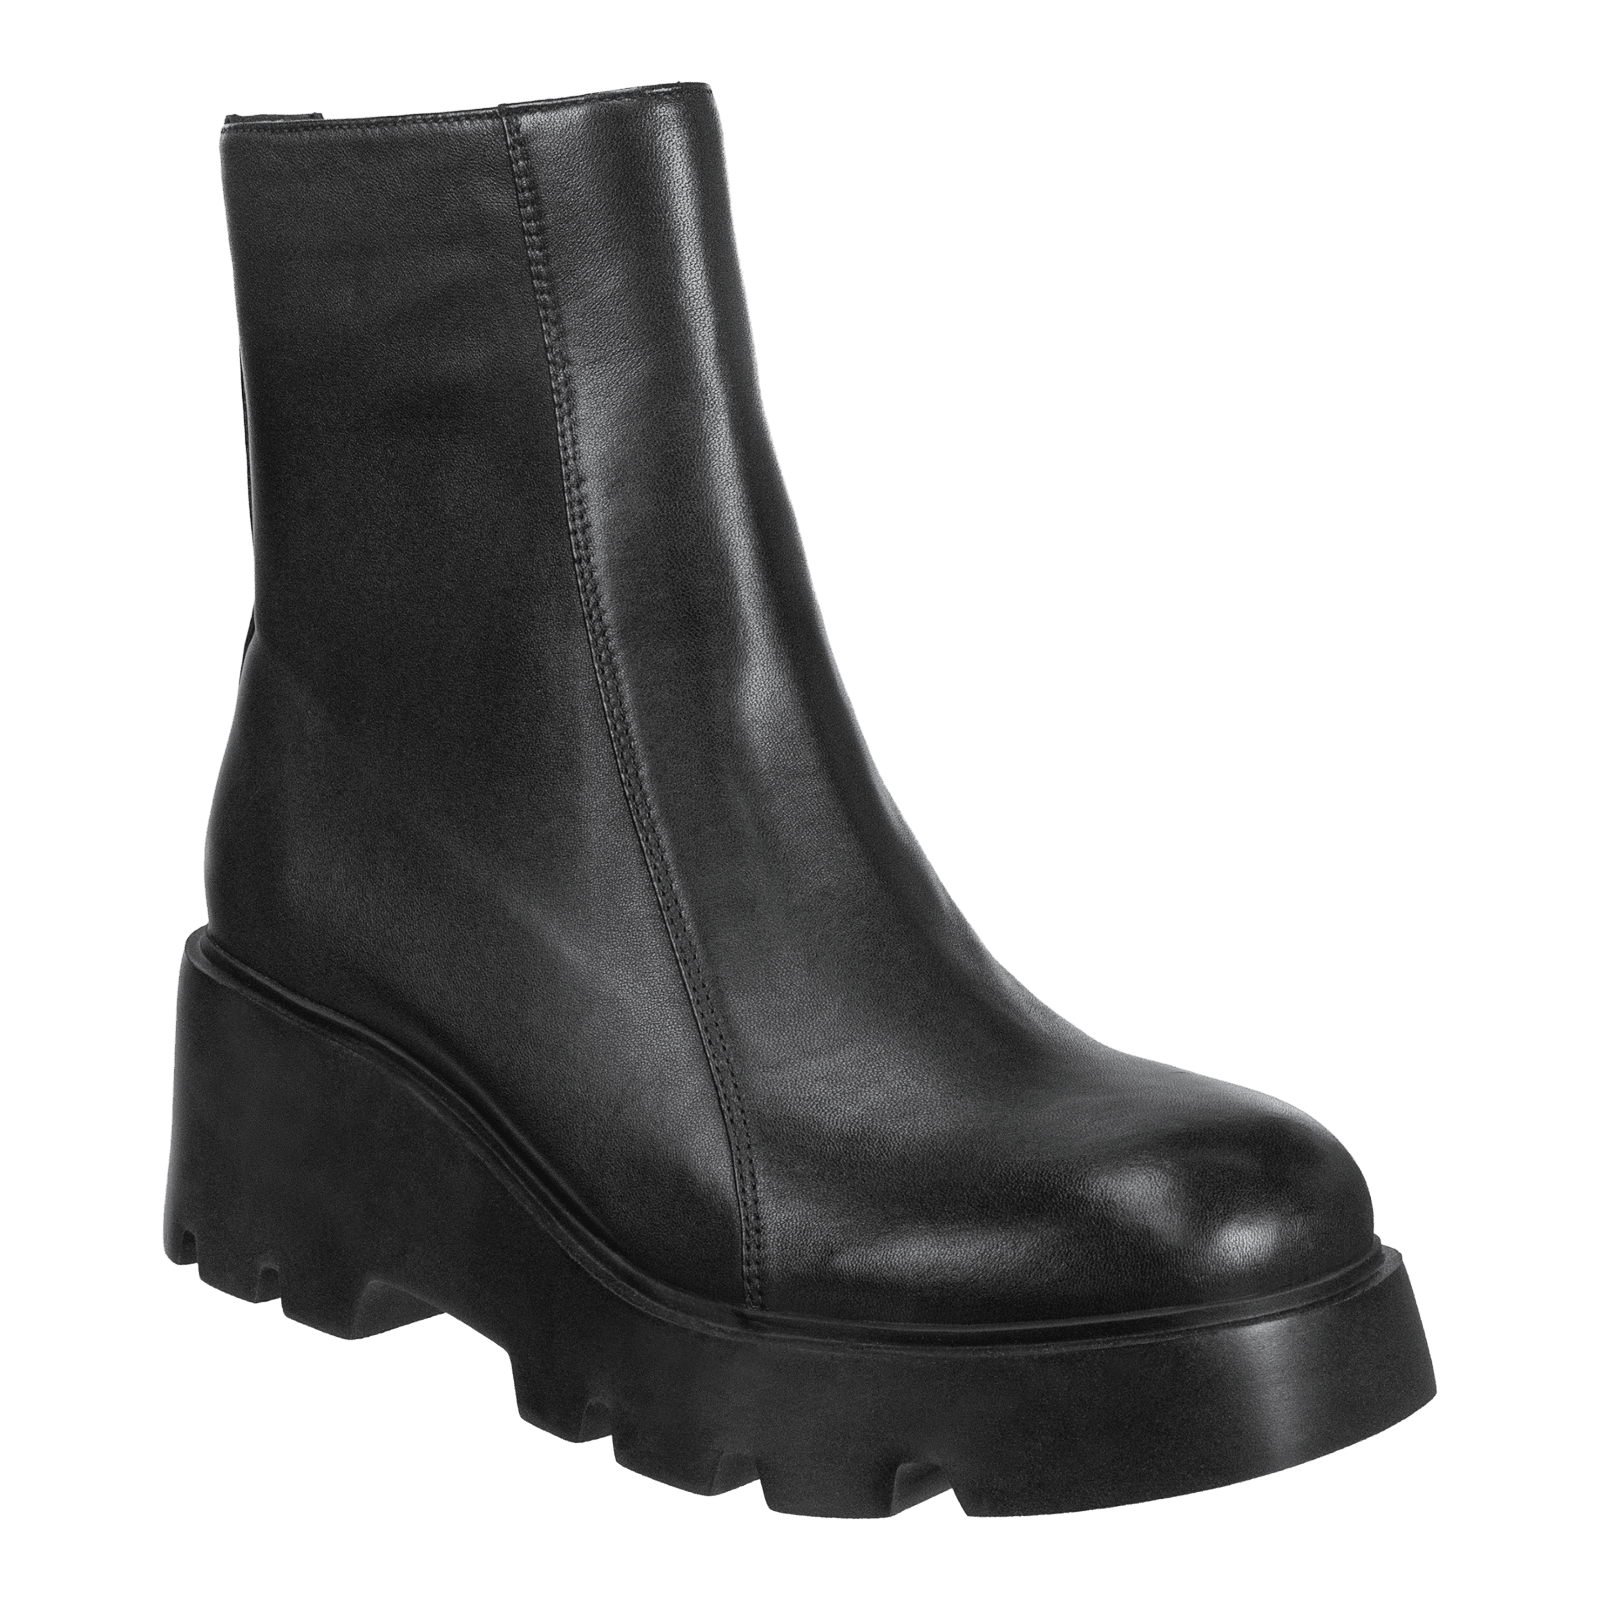 NAKED FEET - XENUS in BLACK LEATHER Platform Ankle Boots WOMEN FOOTWEAR NAKED FEET 